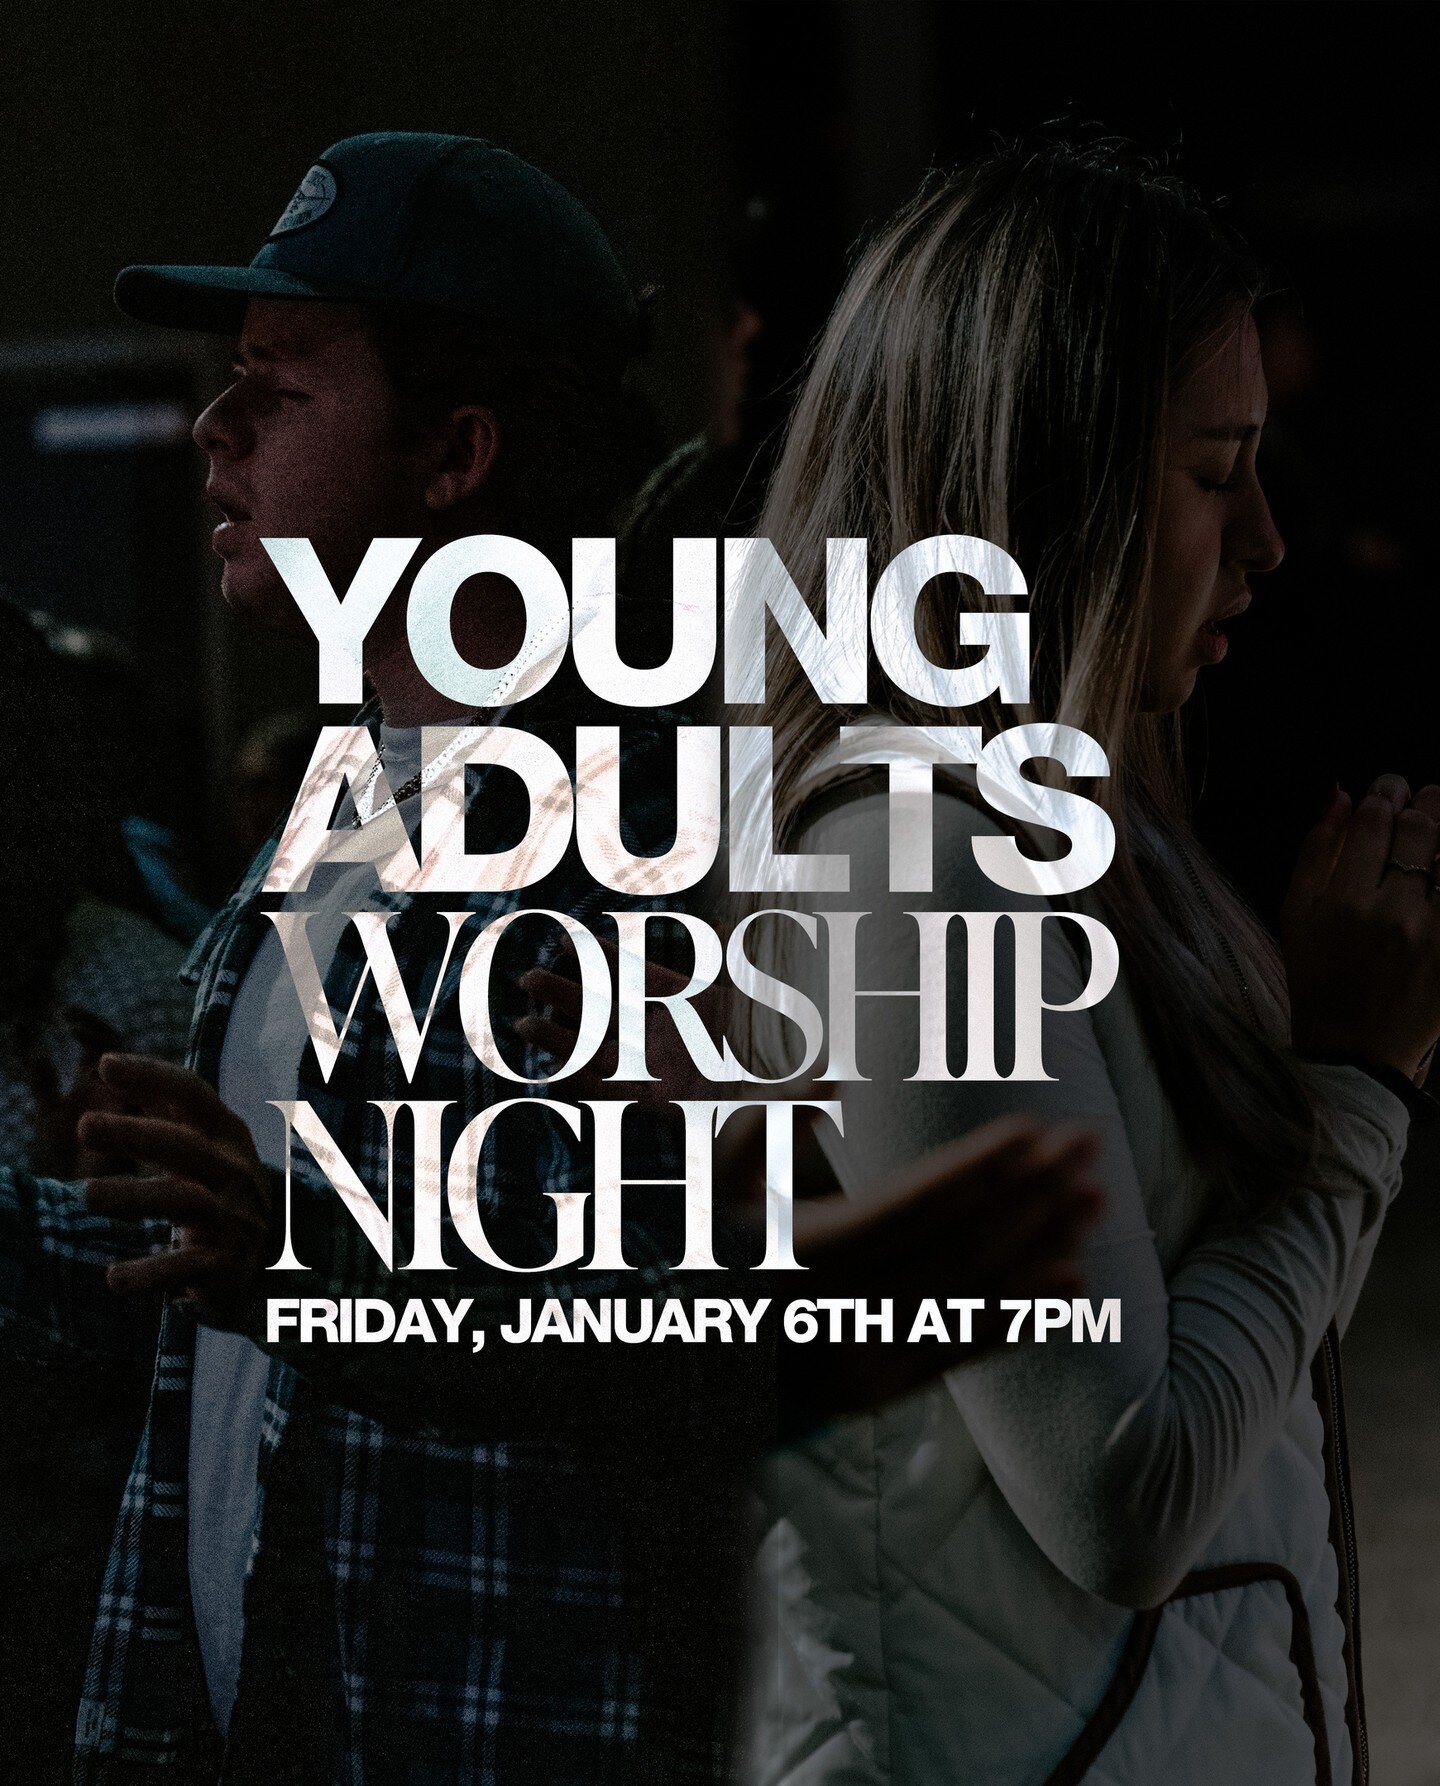 Join us for our Young Adults Worship Night TONIGHT at 7pm 🕊